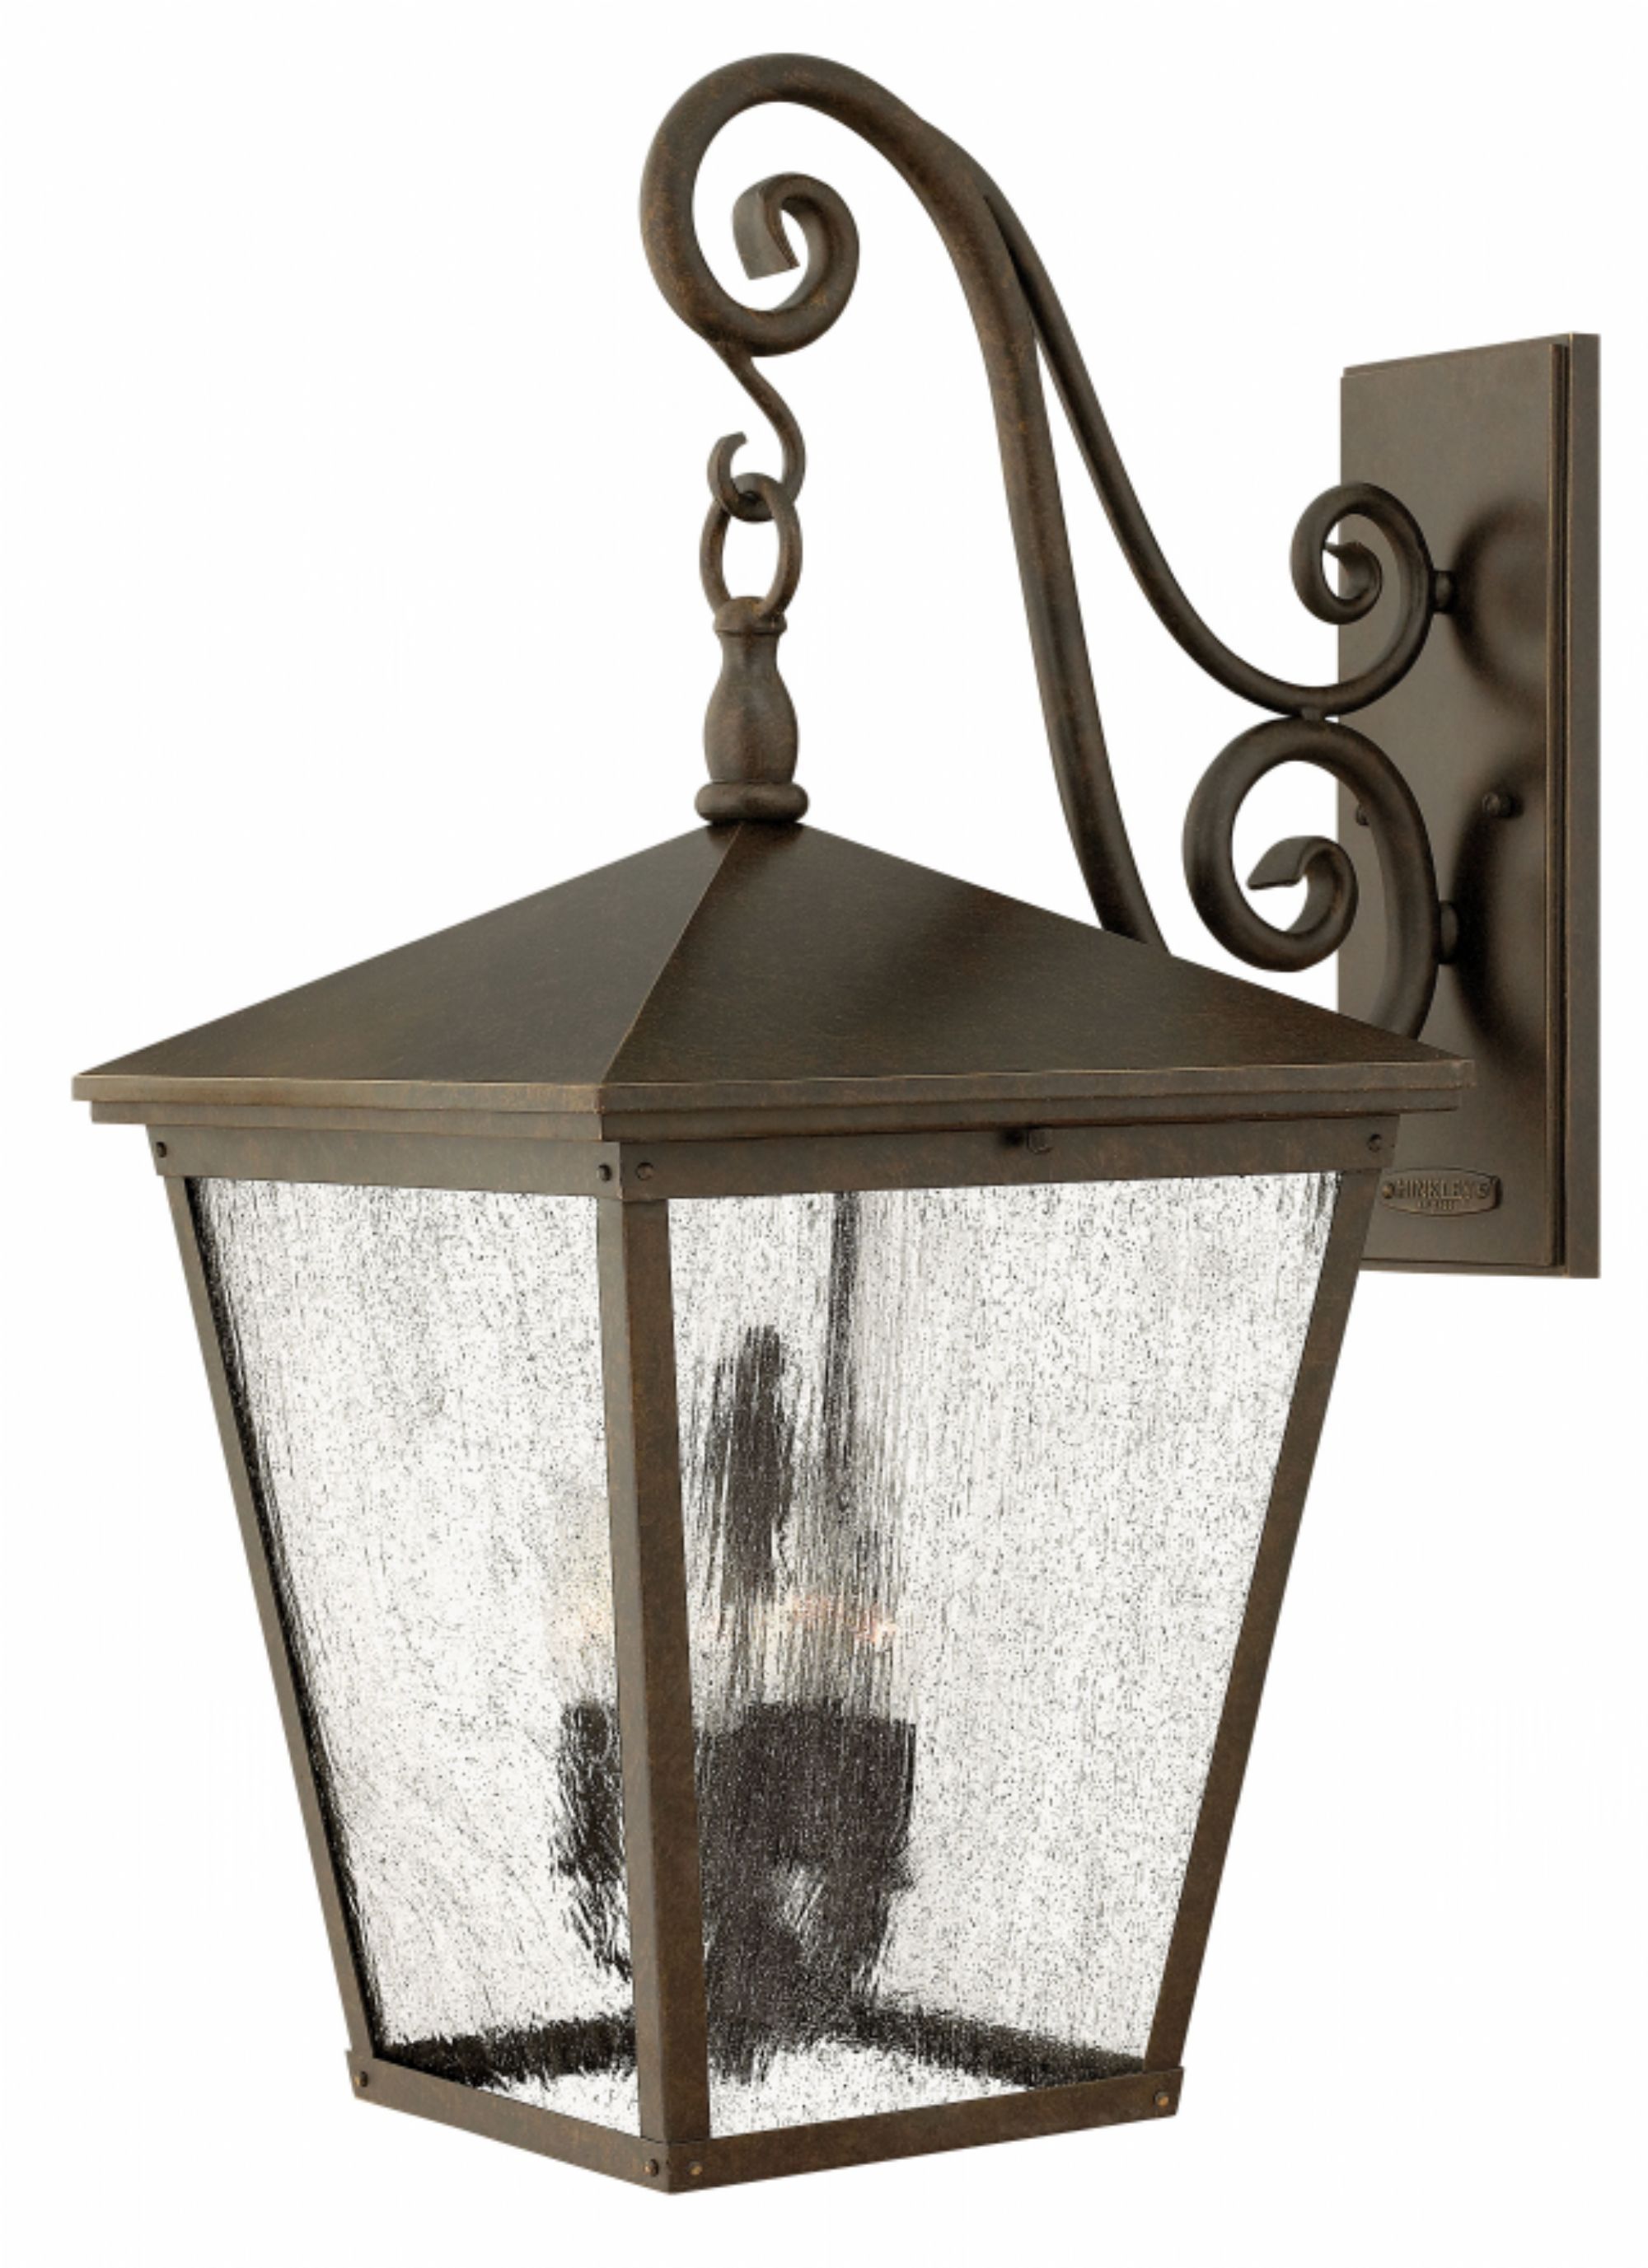 Regency Bronze Trellis > Exterior Wall Mount Throughout Extra Large Wall Mount Porch Hinkley Lighting (View 8 of 15)